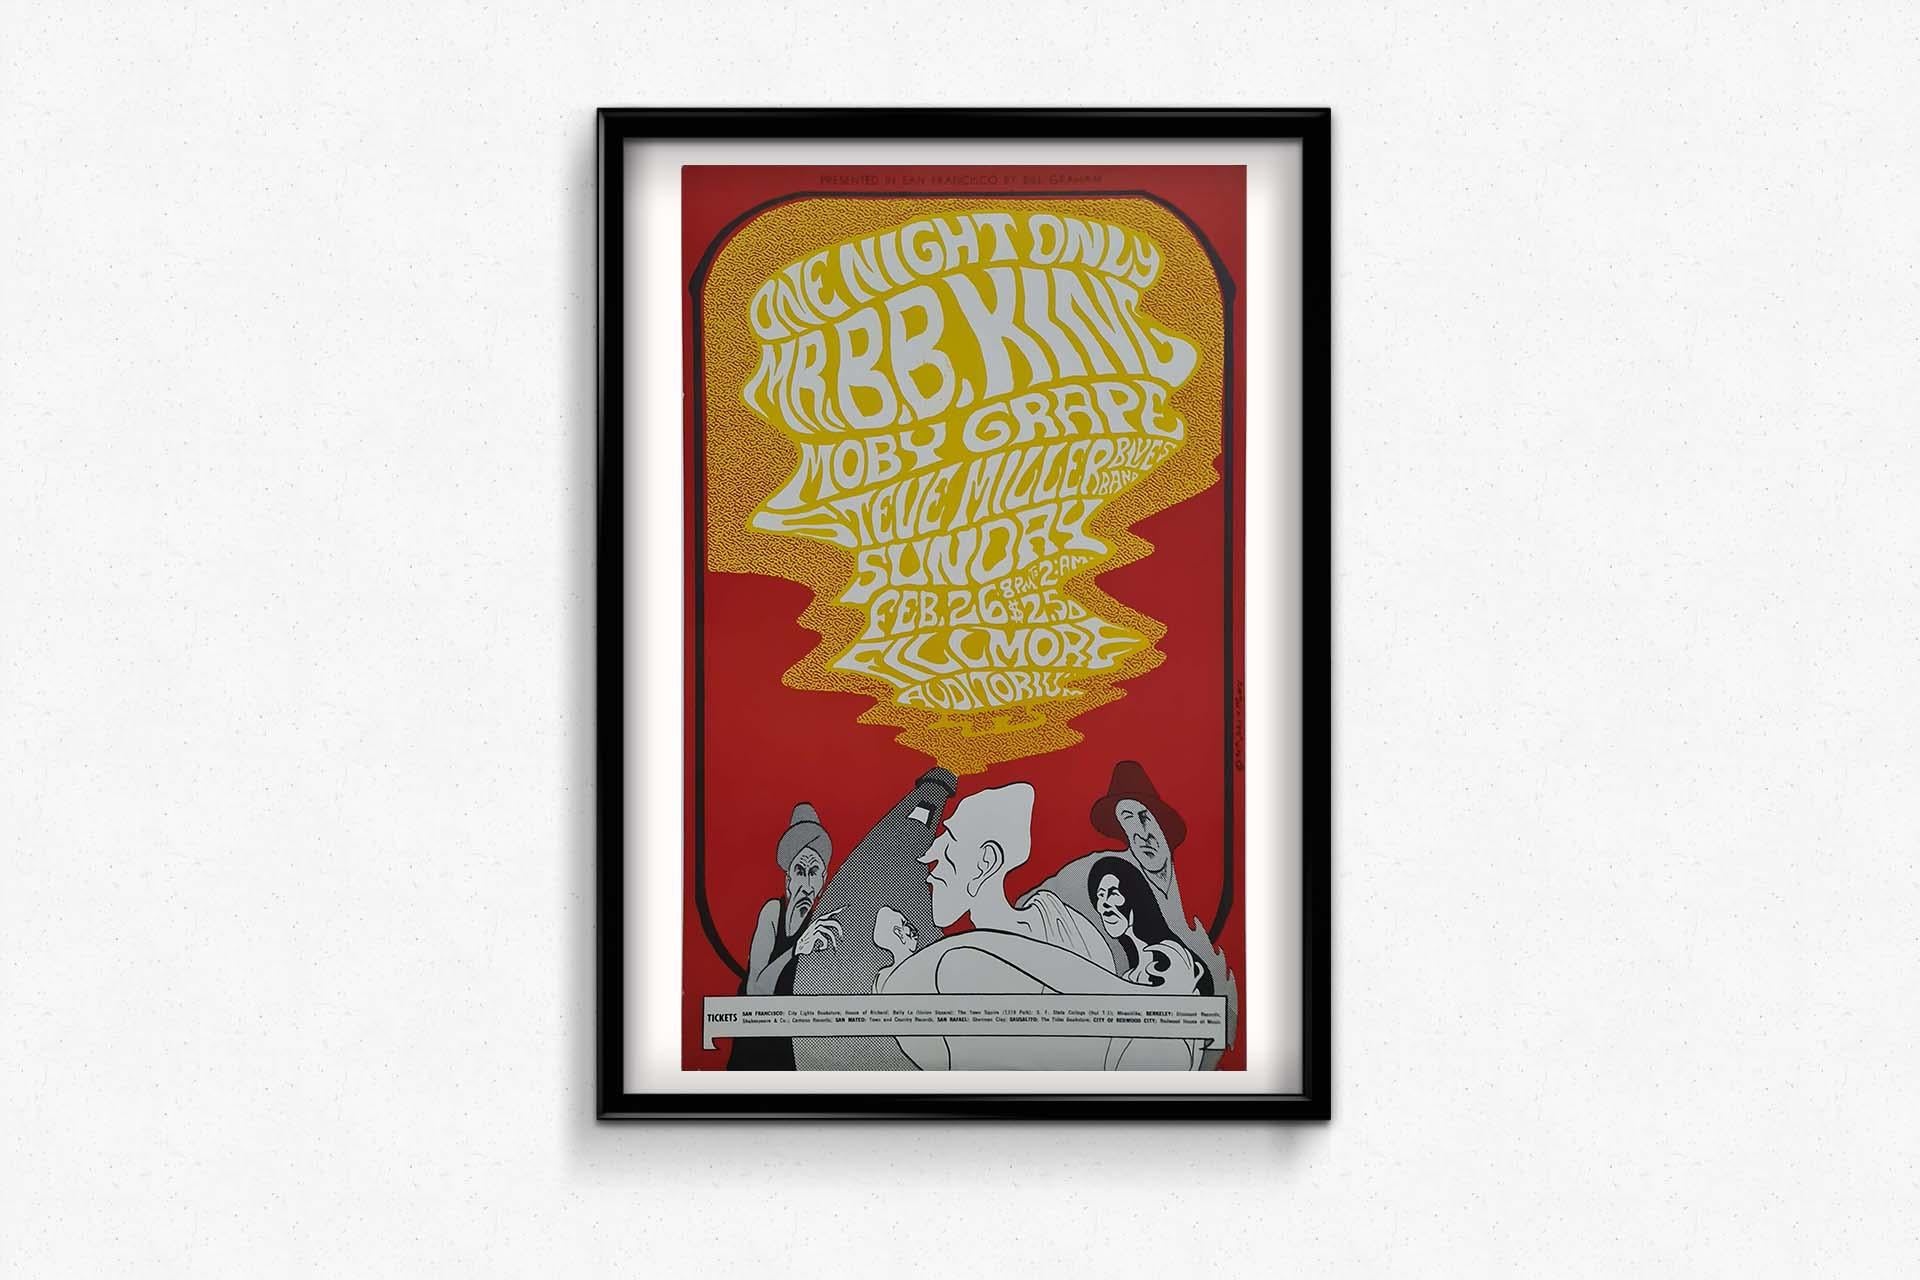 1967 psychedelic poster for the concert of B.B. King, Moby Grape, Steve Miller.. - Abstract Print by John H. Myers